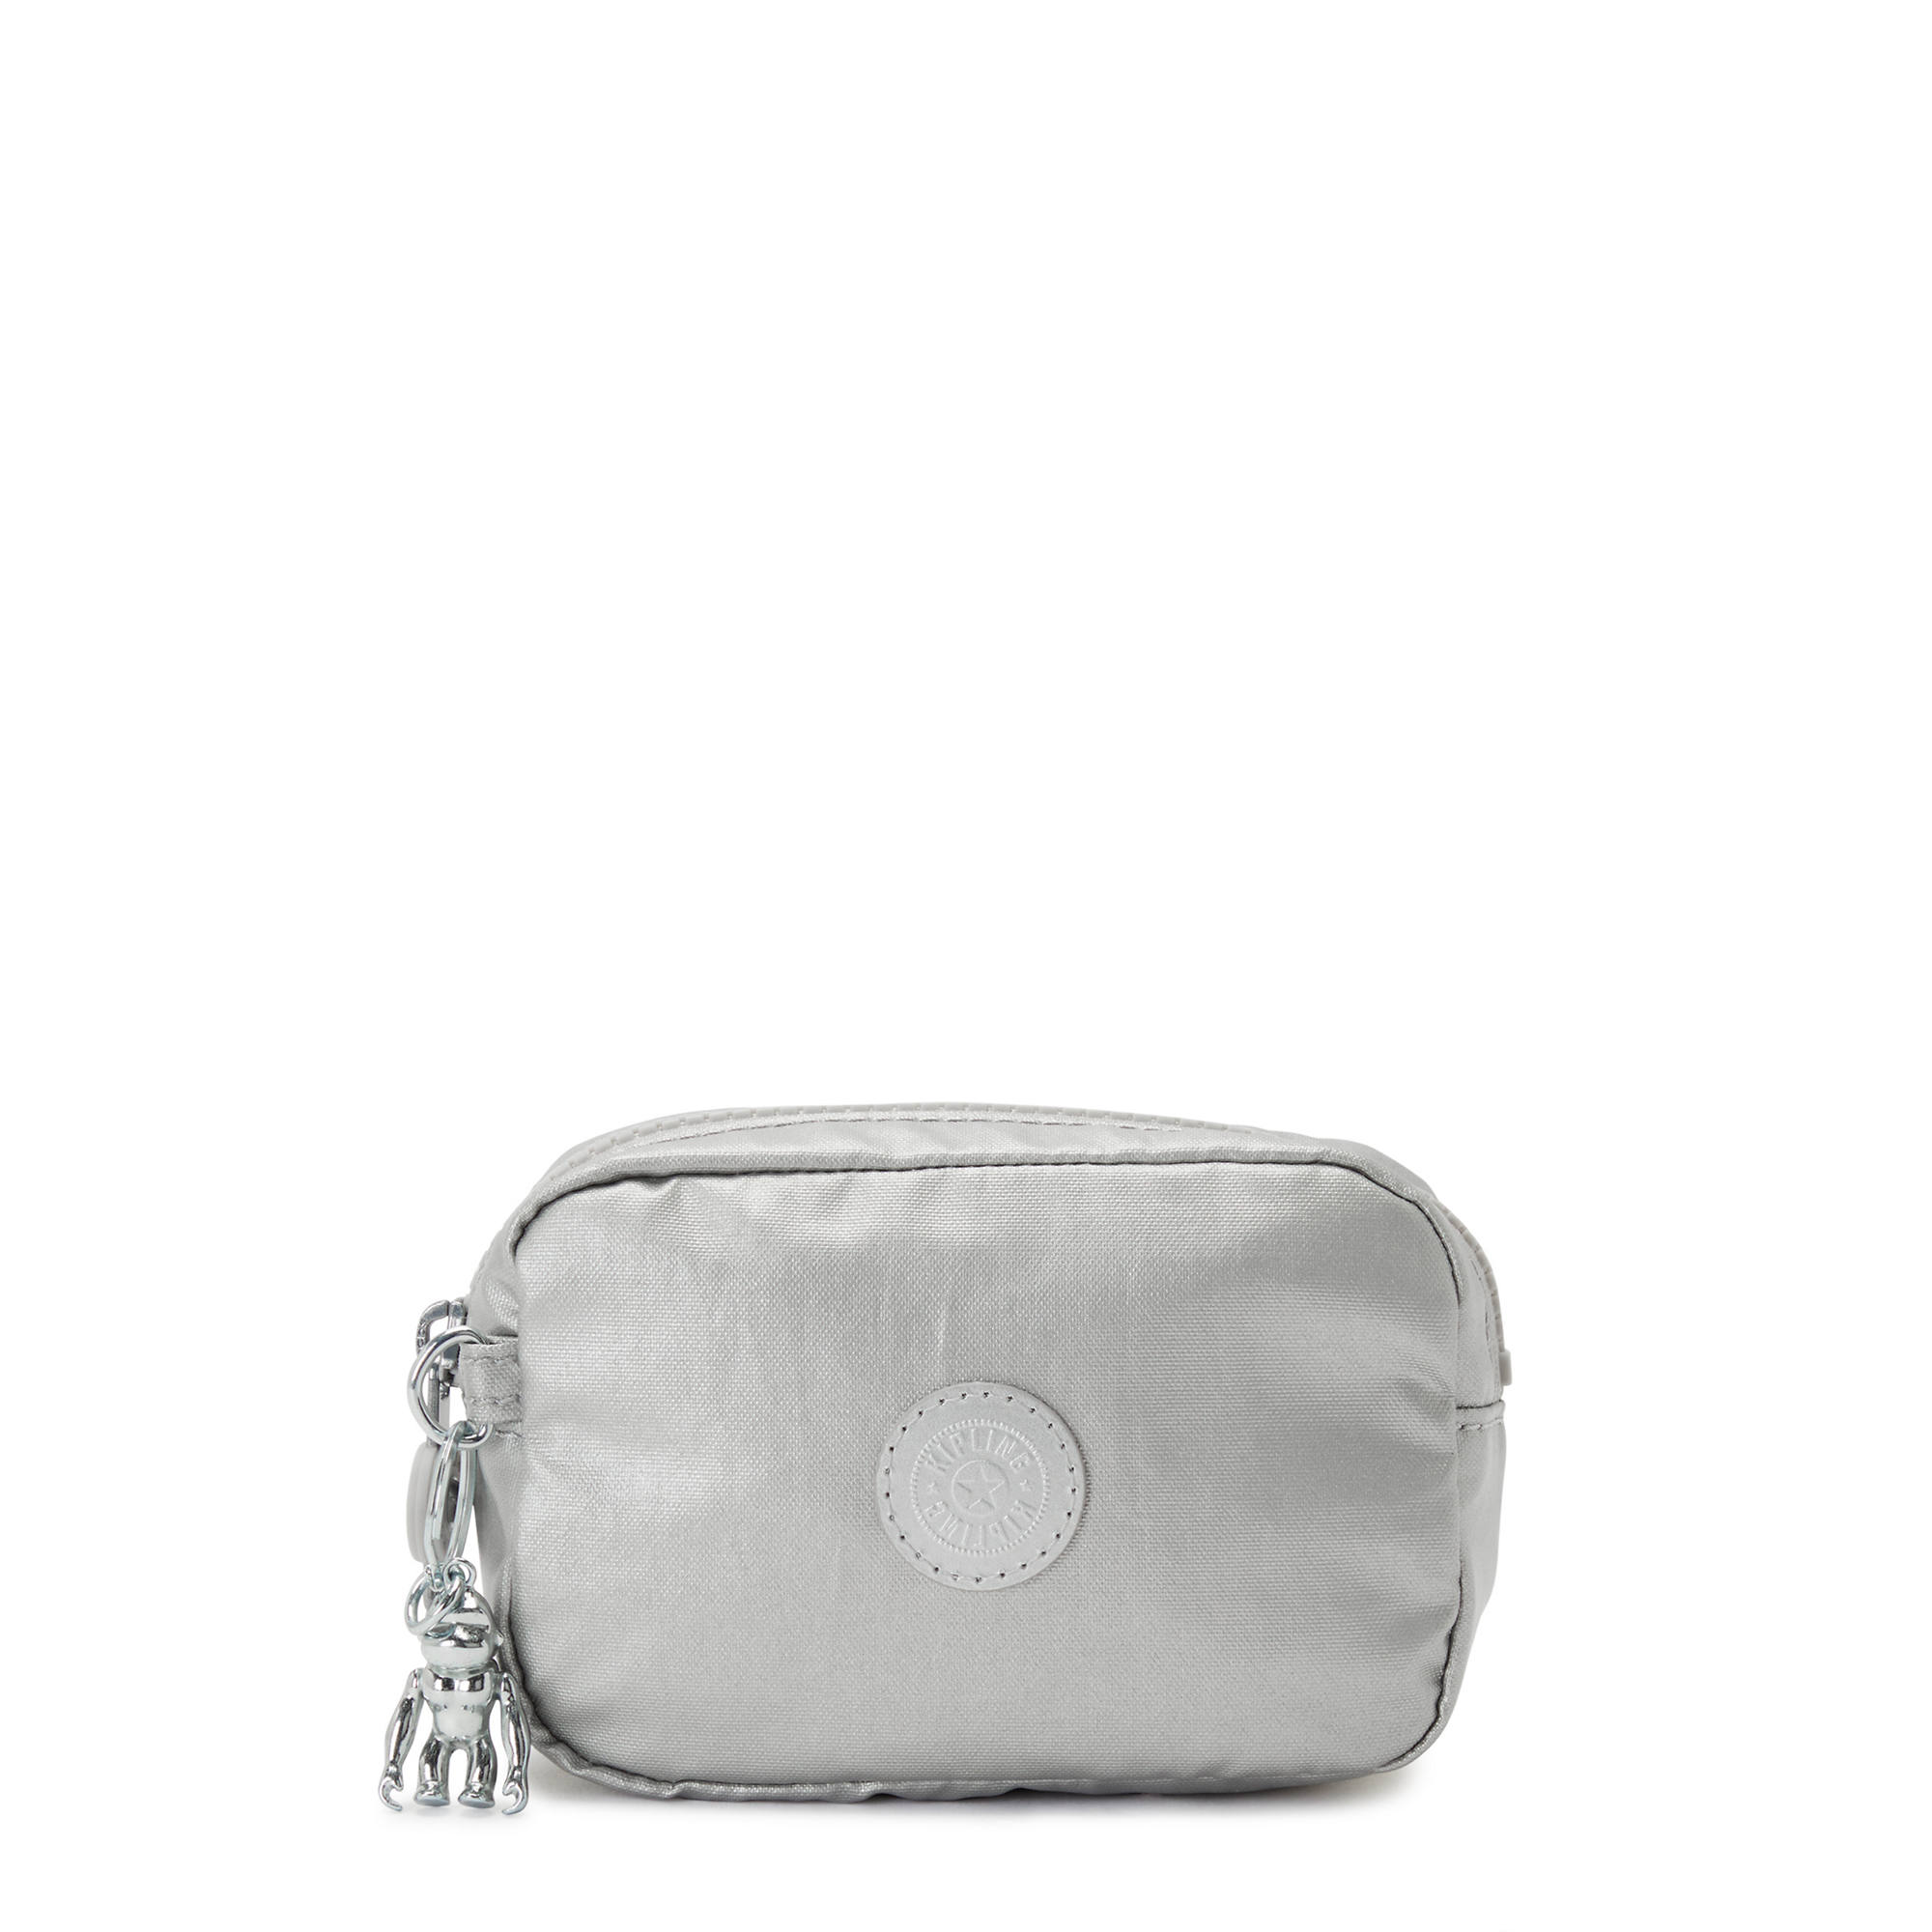 Kipling Gleam Small Pouch Moonlit Forest